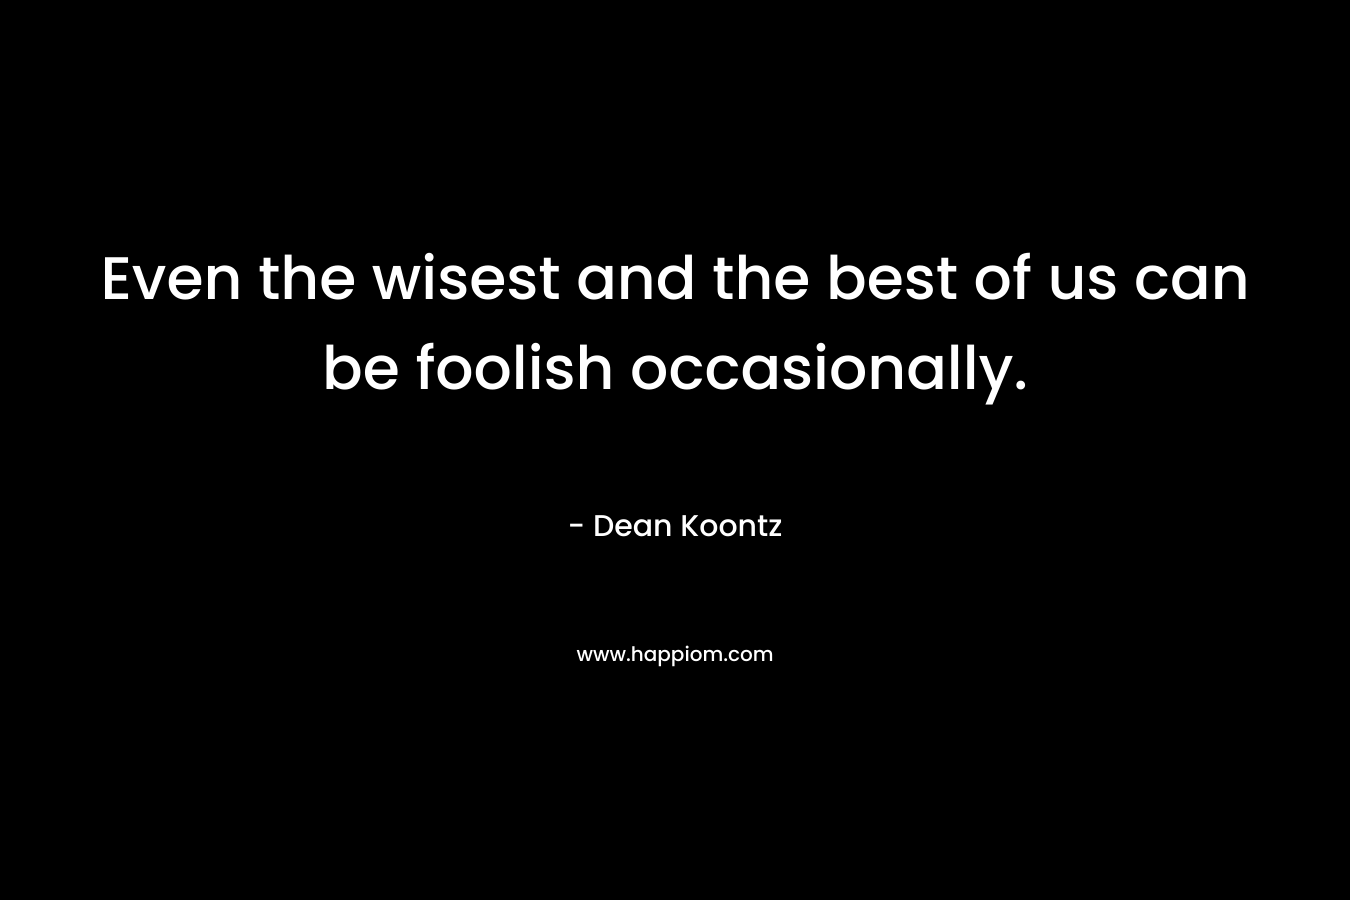 Even the wisest and the best of us can be foolish occasionally. – Dean Koontz